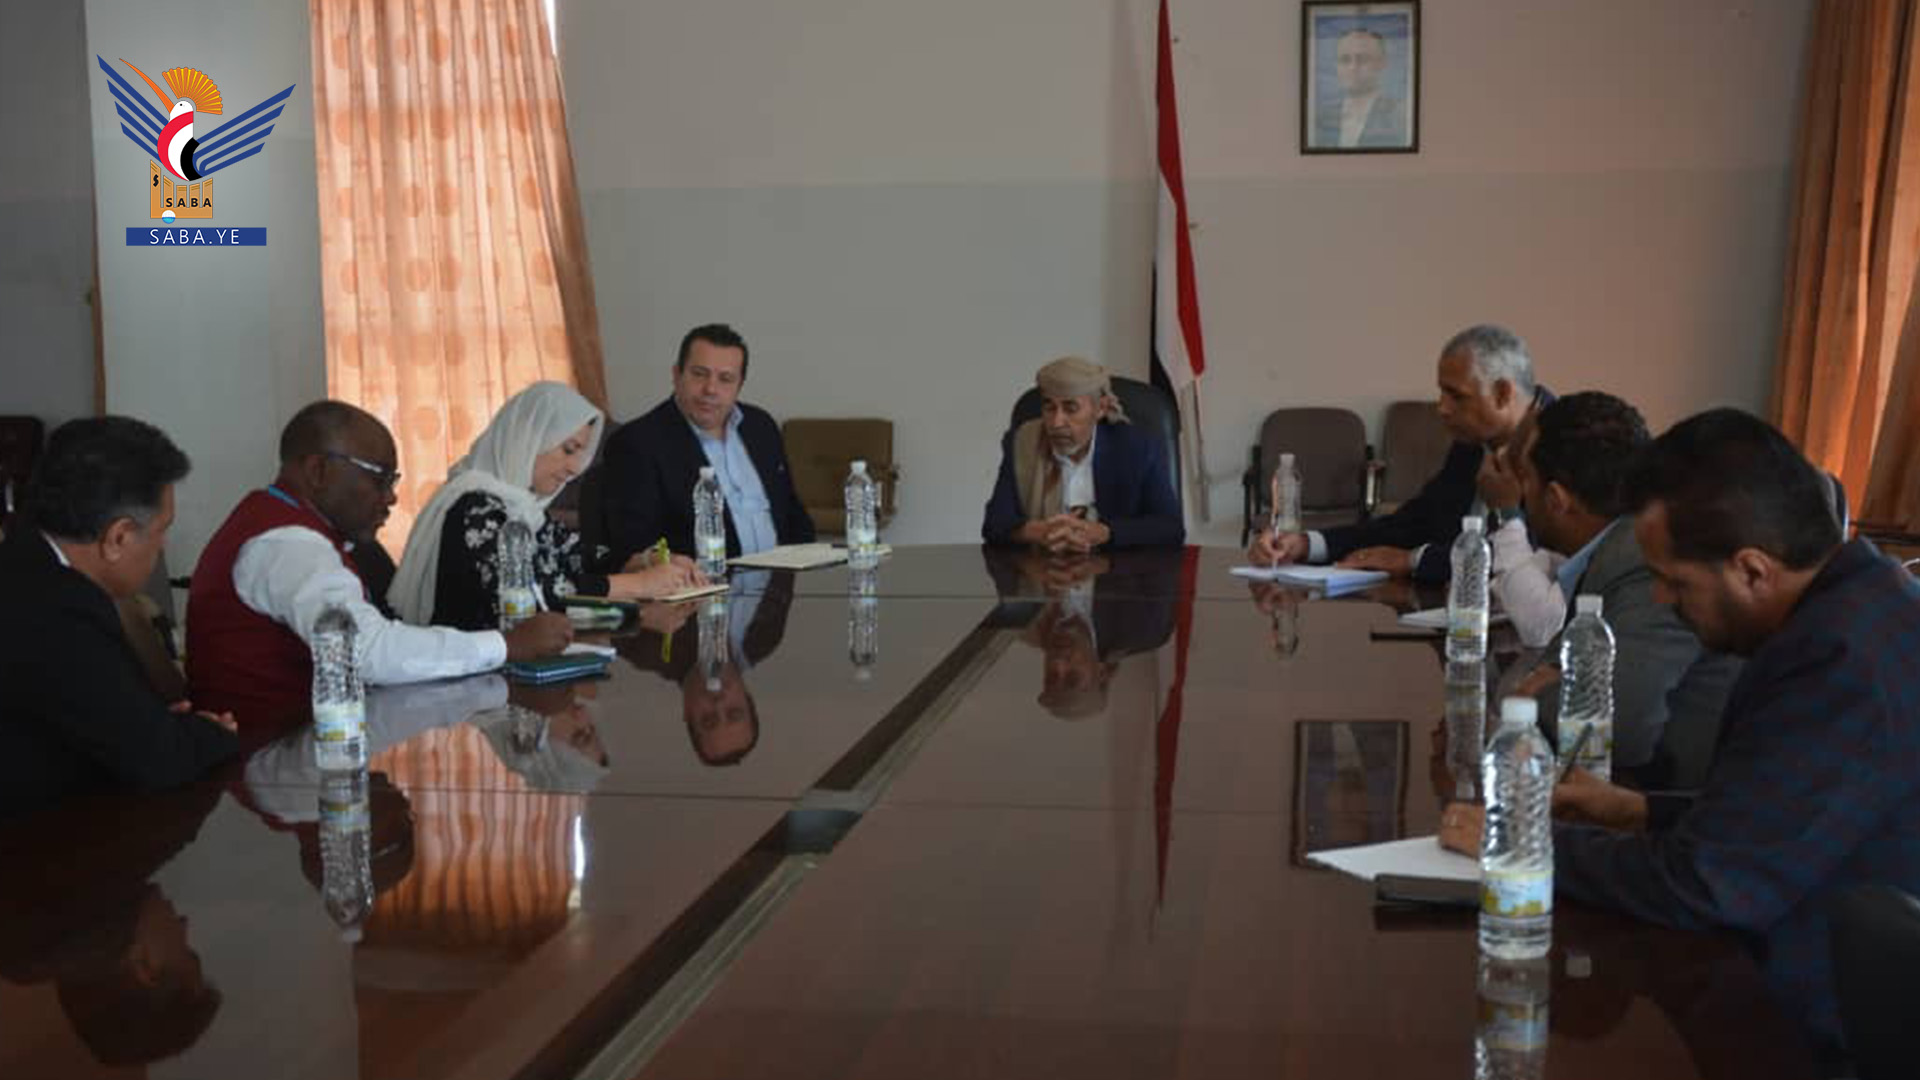 UNICEF activities, interventions in Ibb province discussed